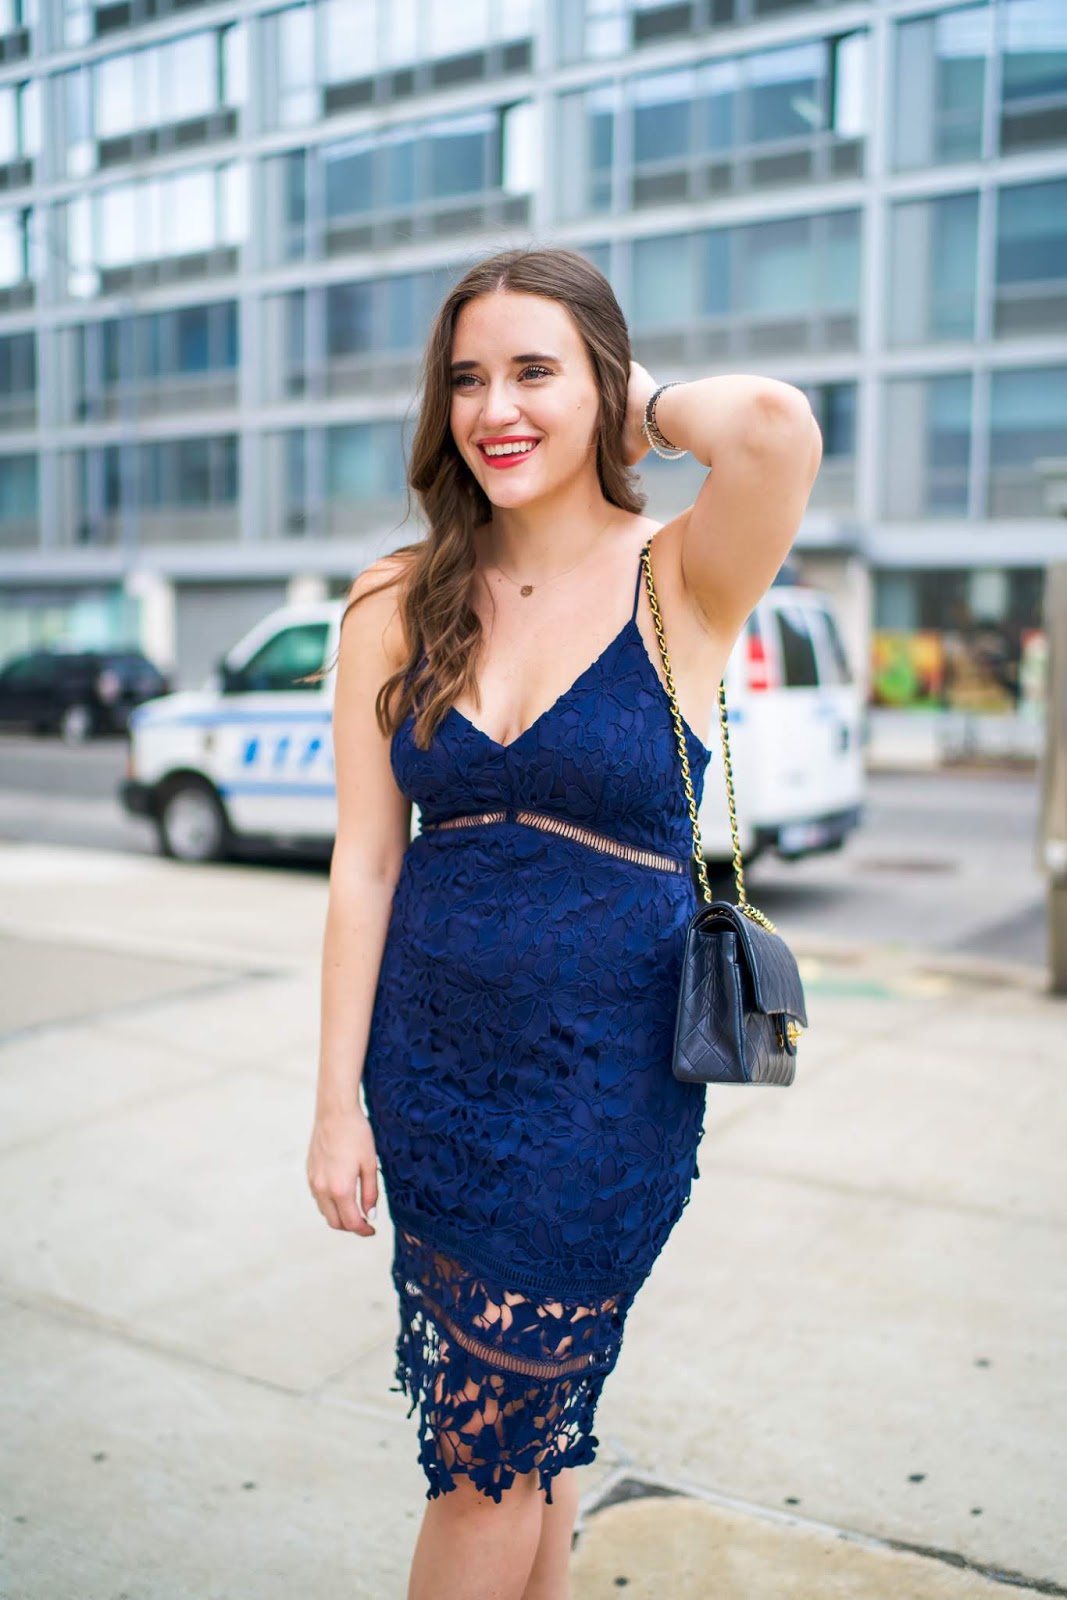 Formal Wedding Guest Dress (Under $100) featured by popular New York style blogger, Covering the Bases